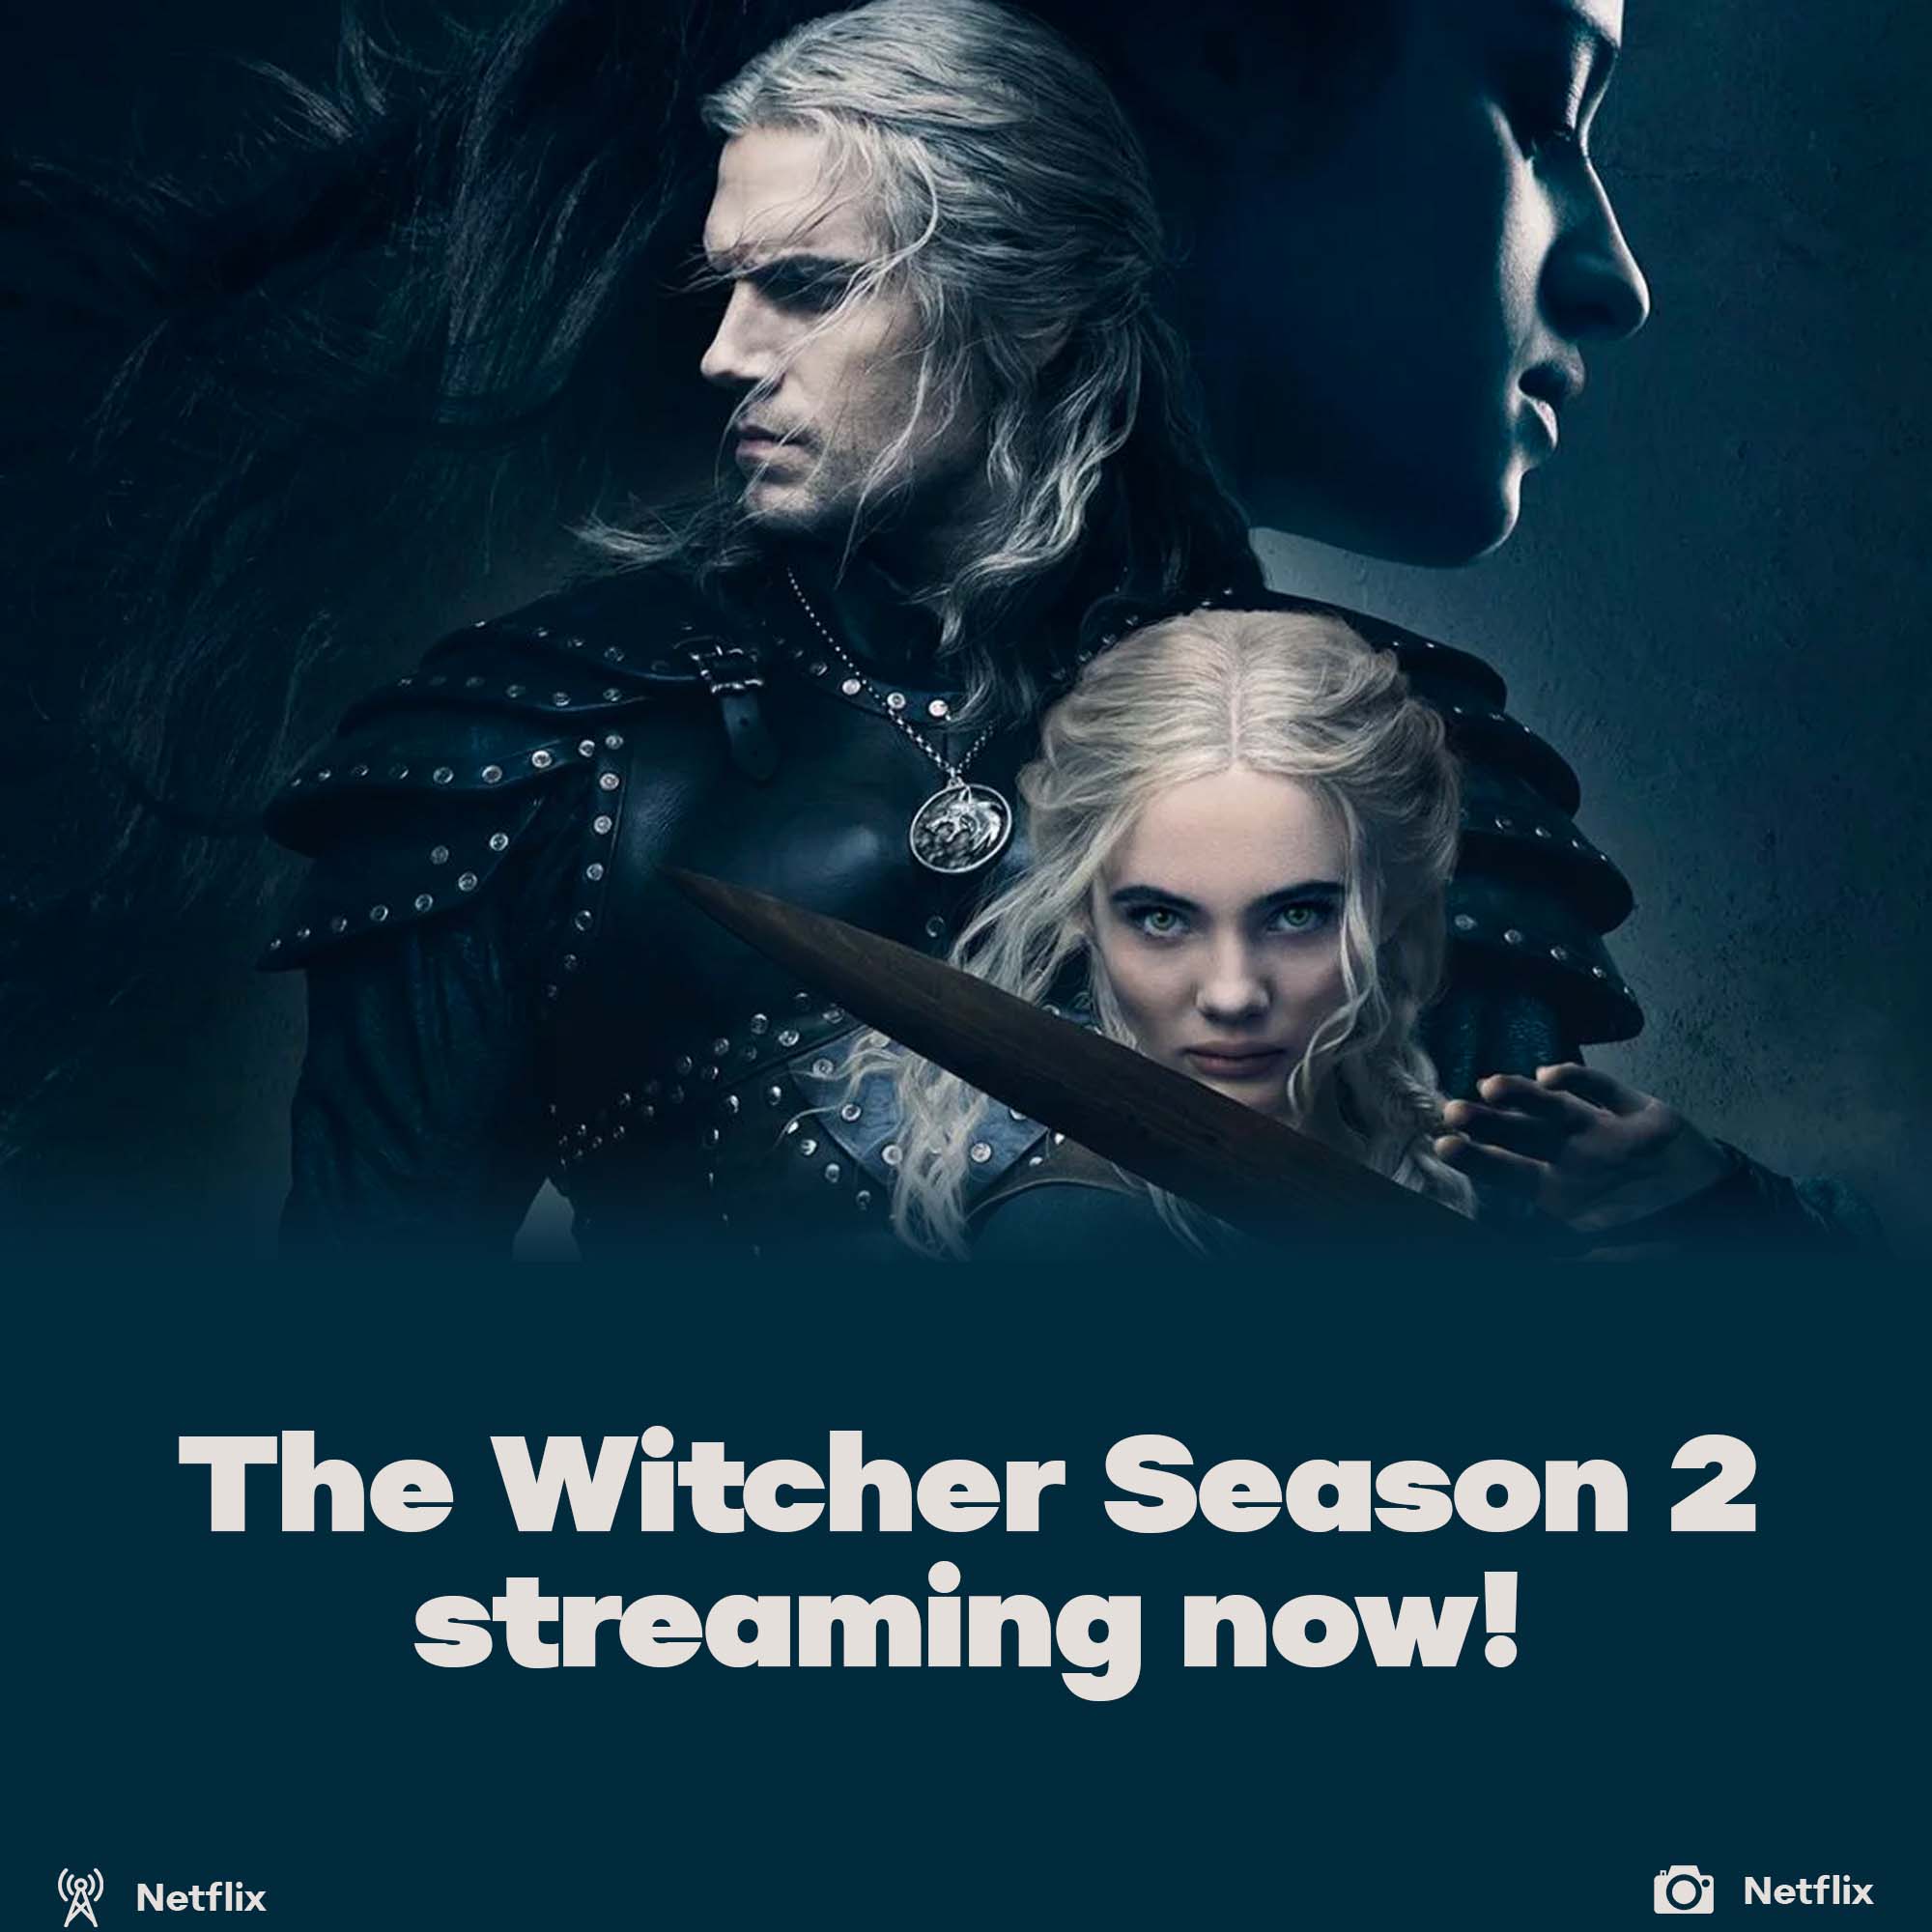 The Witcher Season 2 is streaming now on Netflix